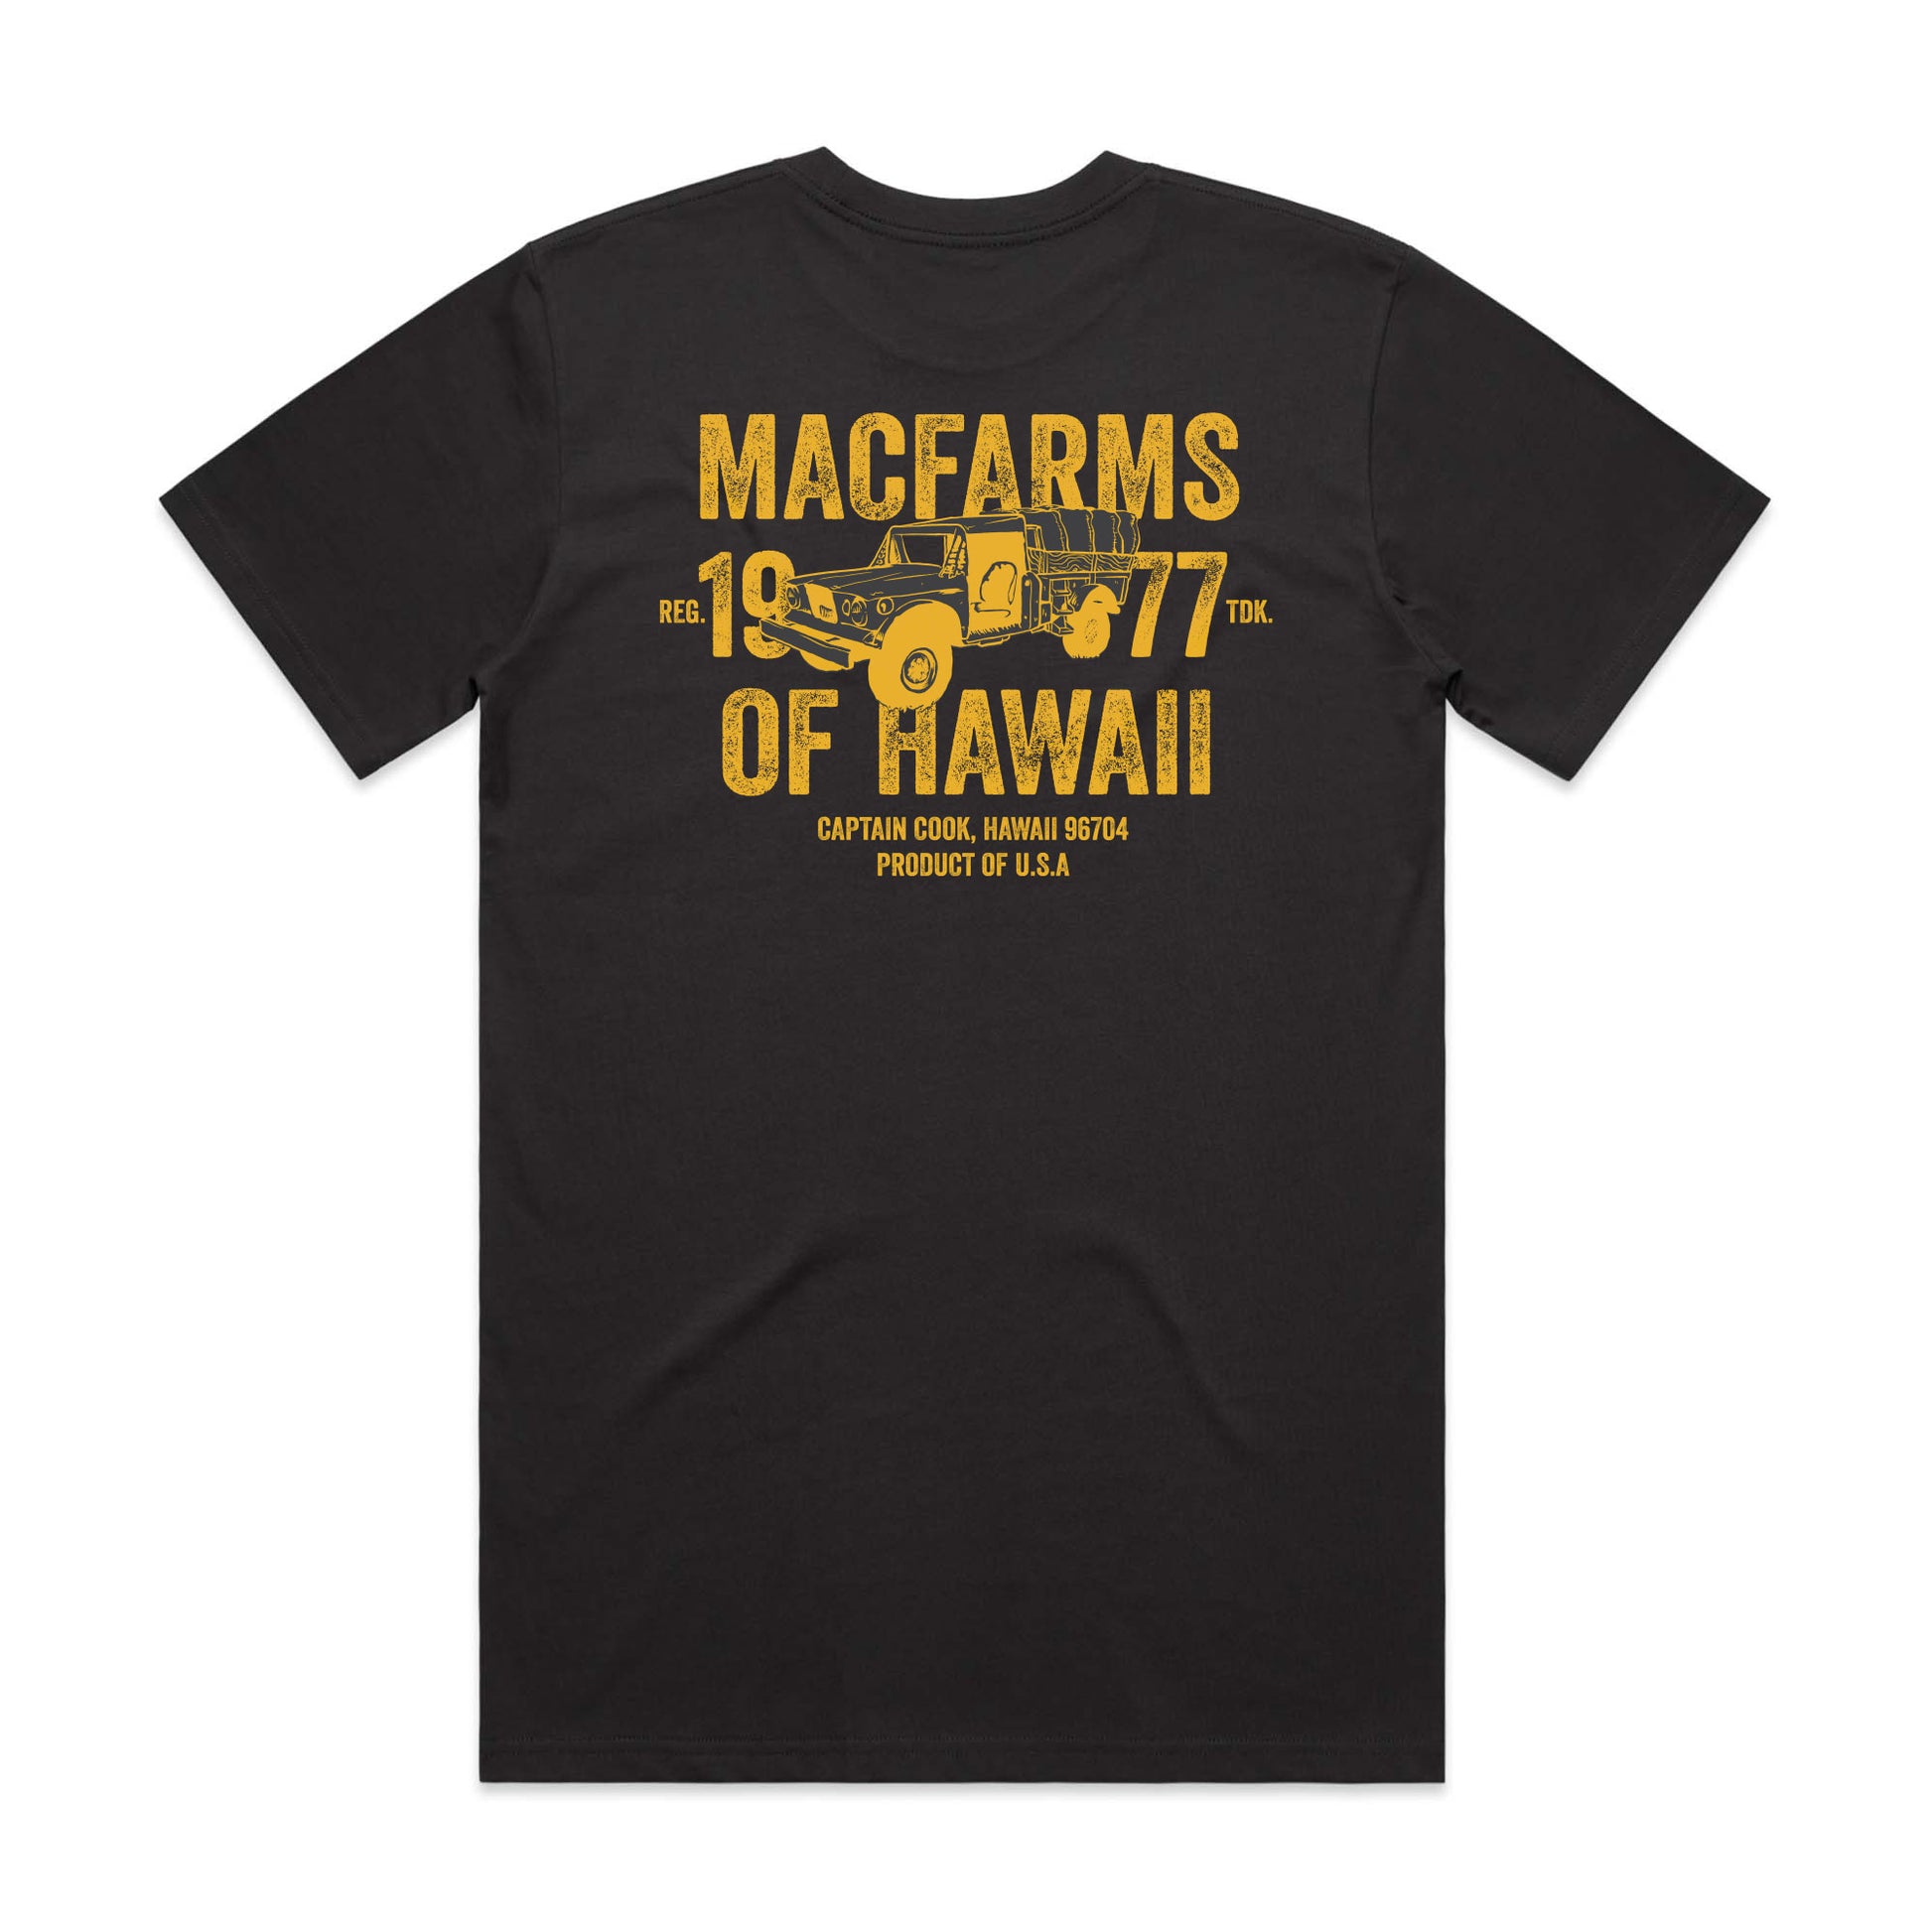 MacFarms of Hawaii since 1977 Vintage black t-shirt with truck design